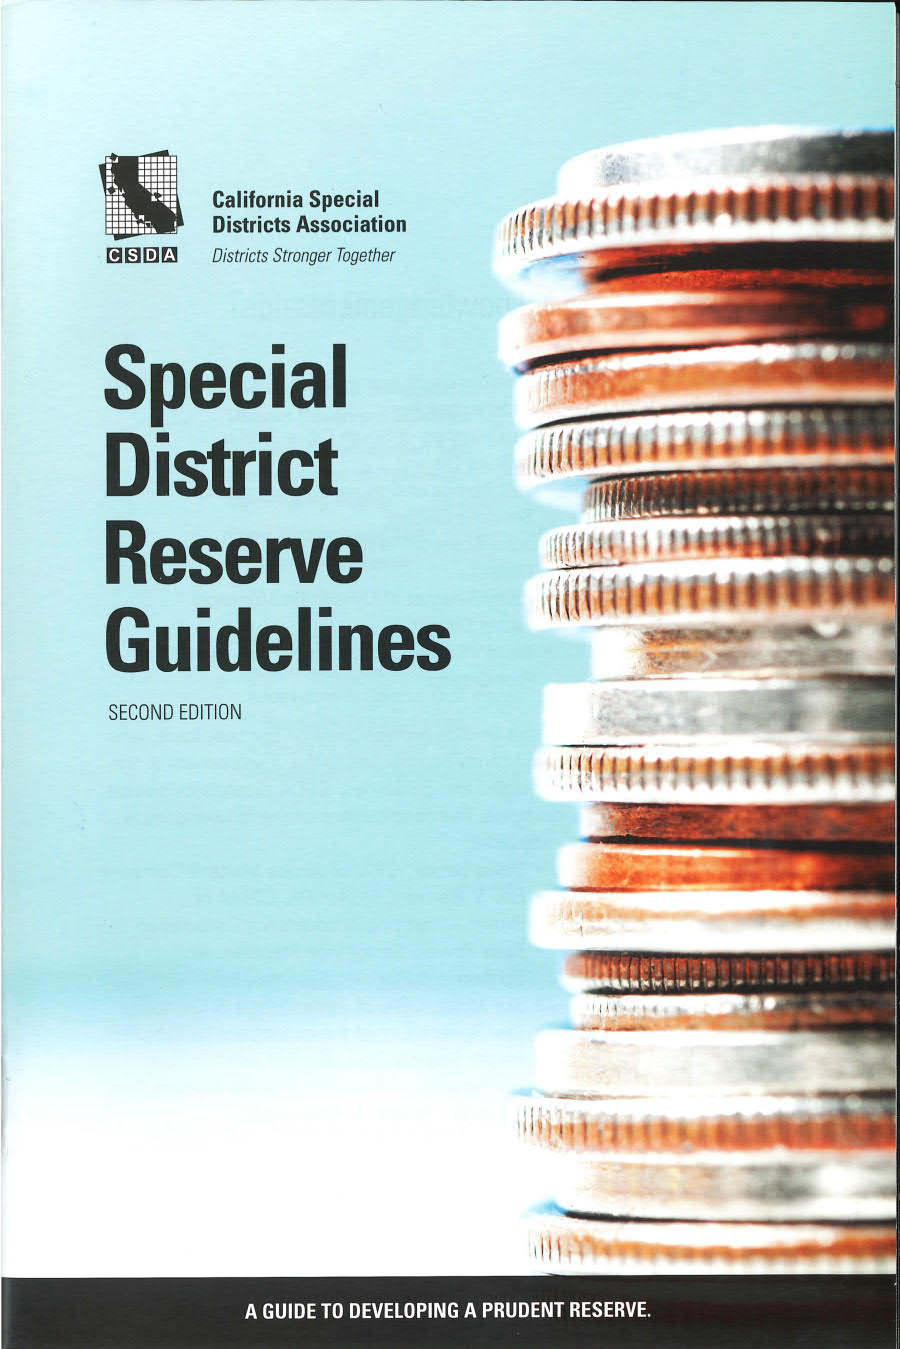 Special District Reserve Guidelines, Second Edition